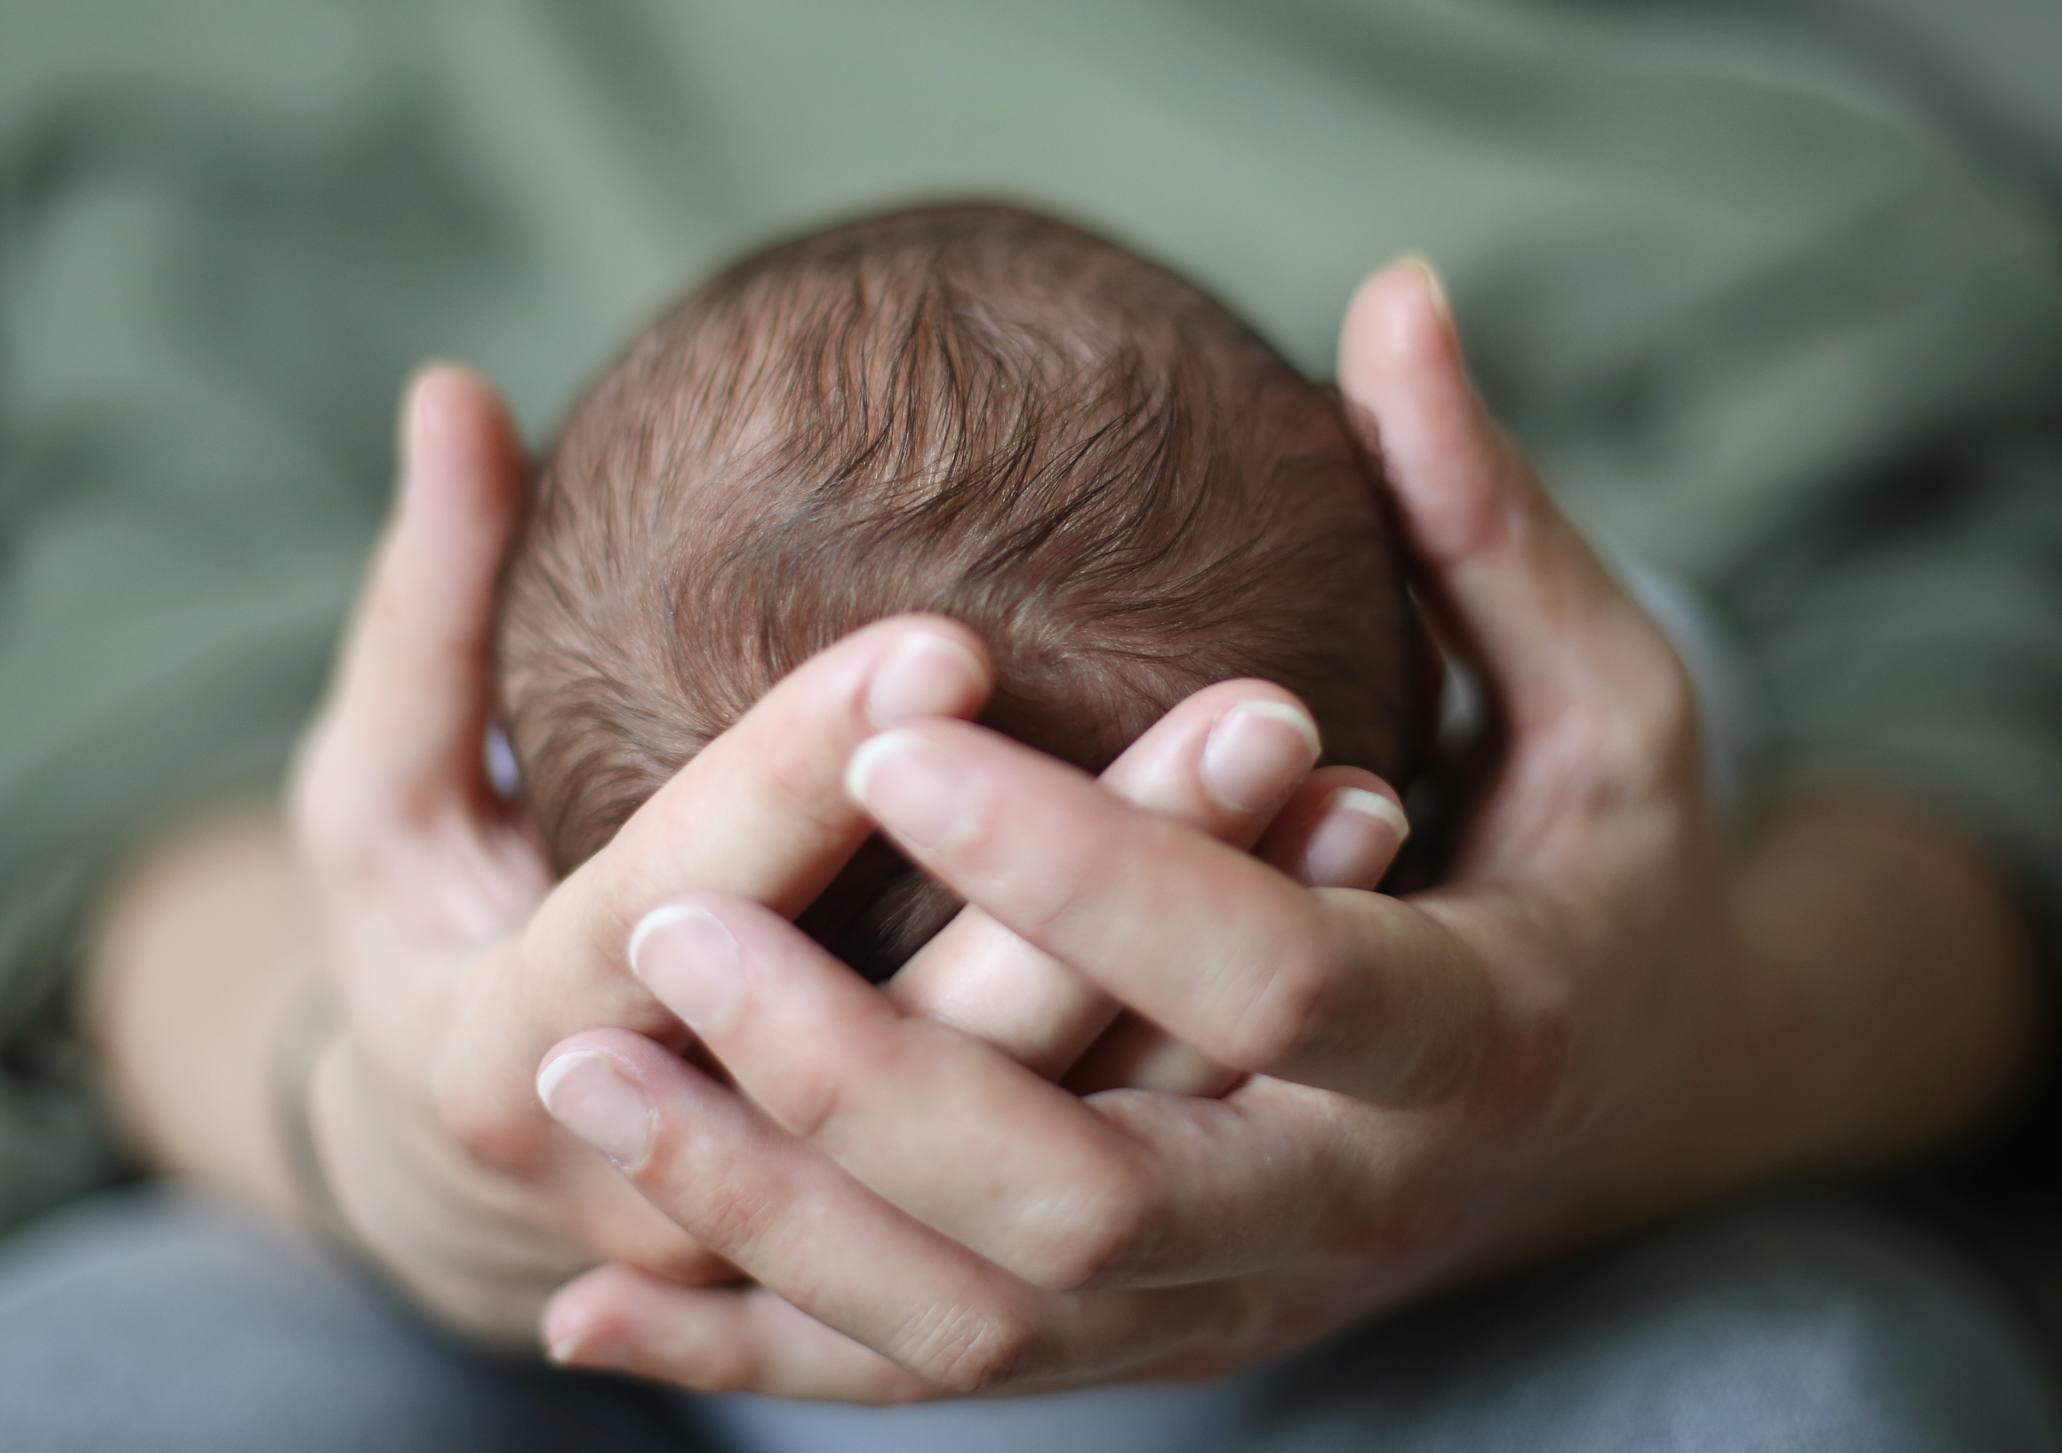 The head of a newborn in his mother's hands.